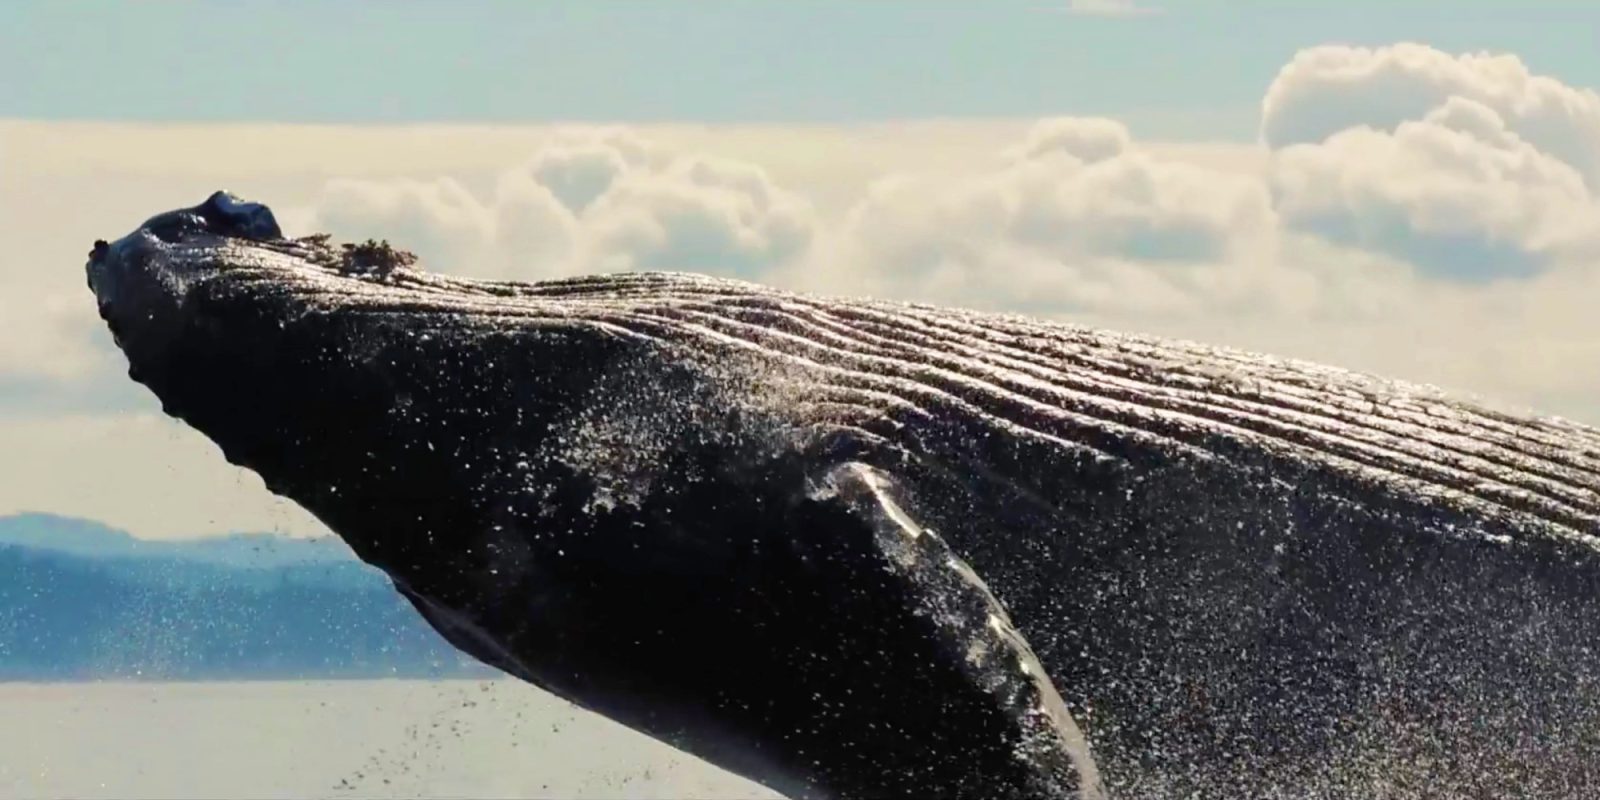 Ocean Alliance's SnotBot drone (DJI Inspire) is changing the way we see and study whales